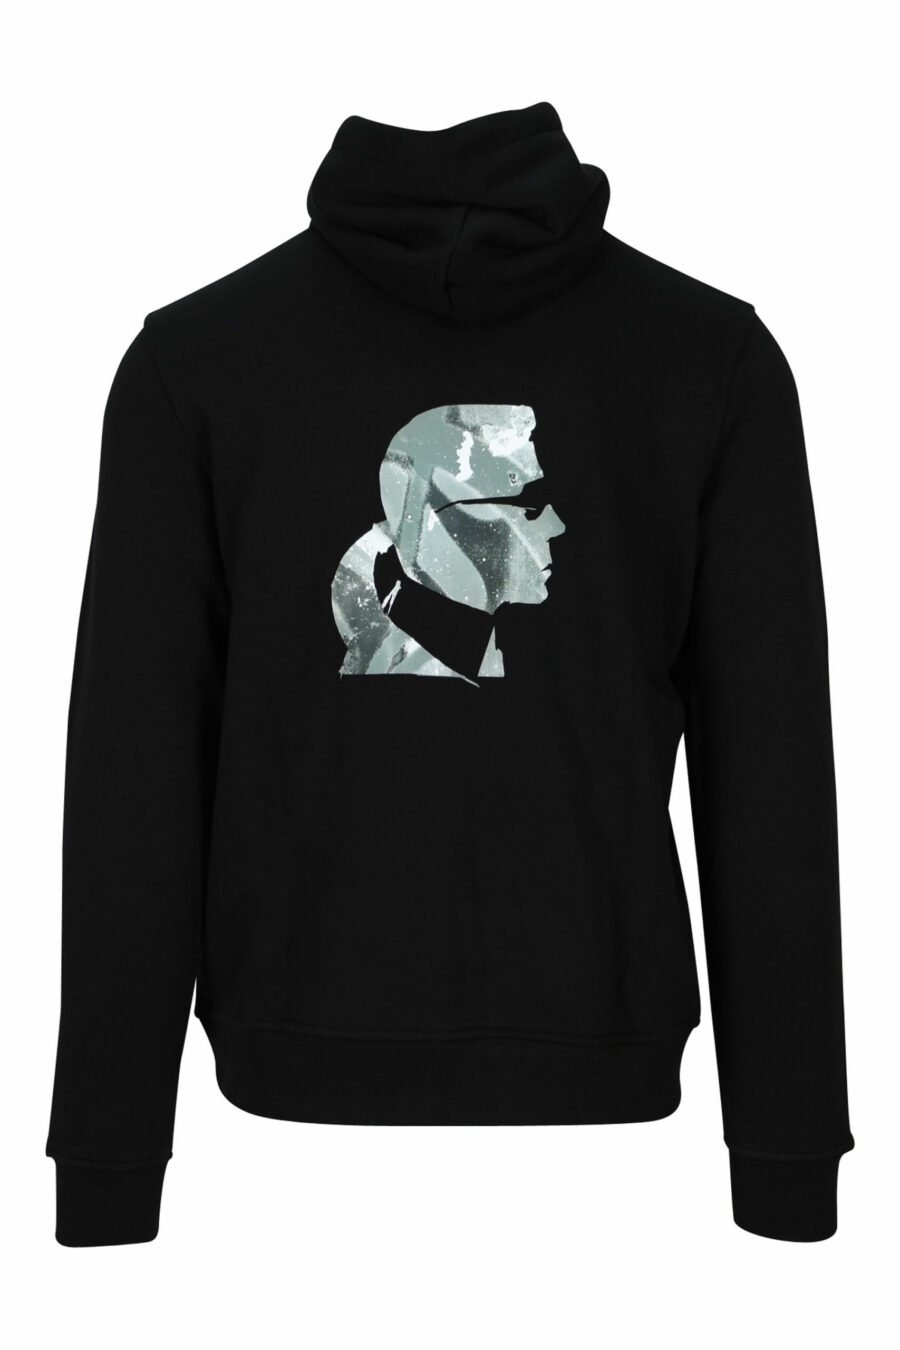 Black hooded sweatshirt with "rue st guillaume" logo - 4062226395977 1 scaled